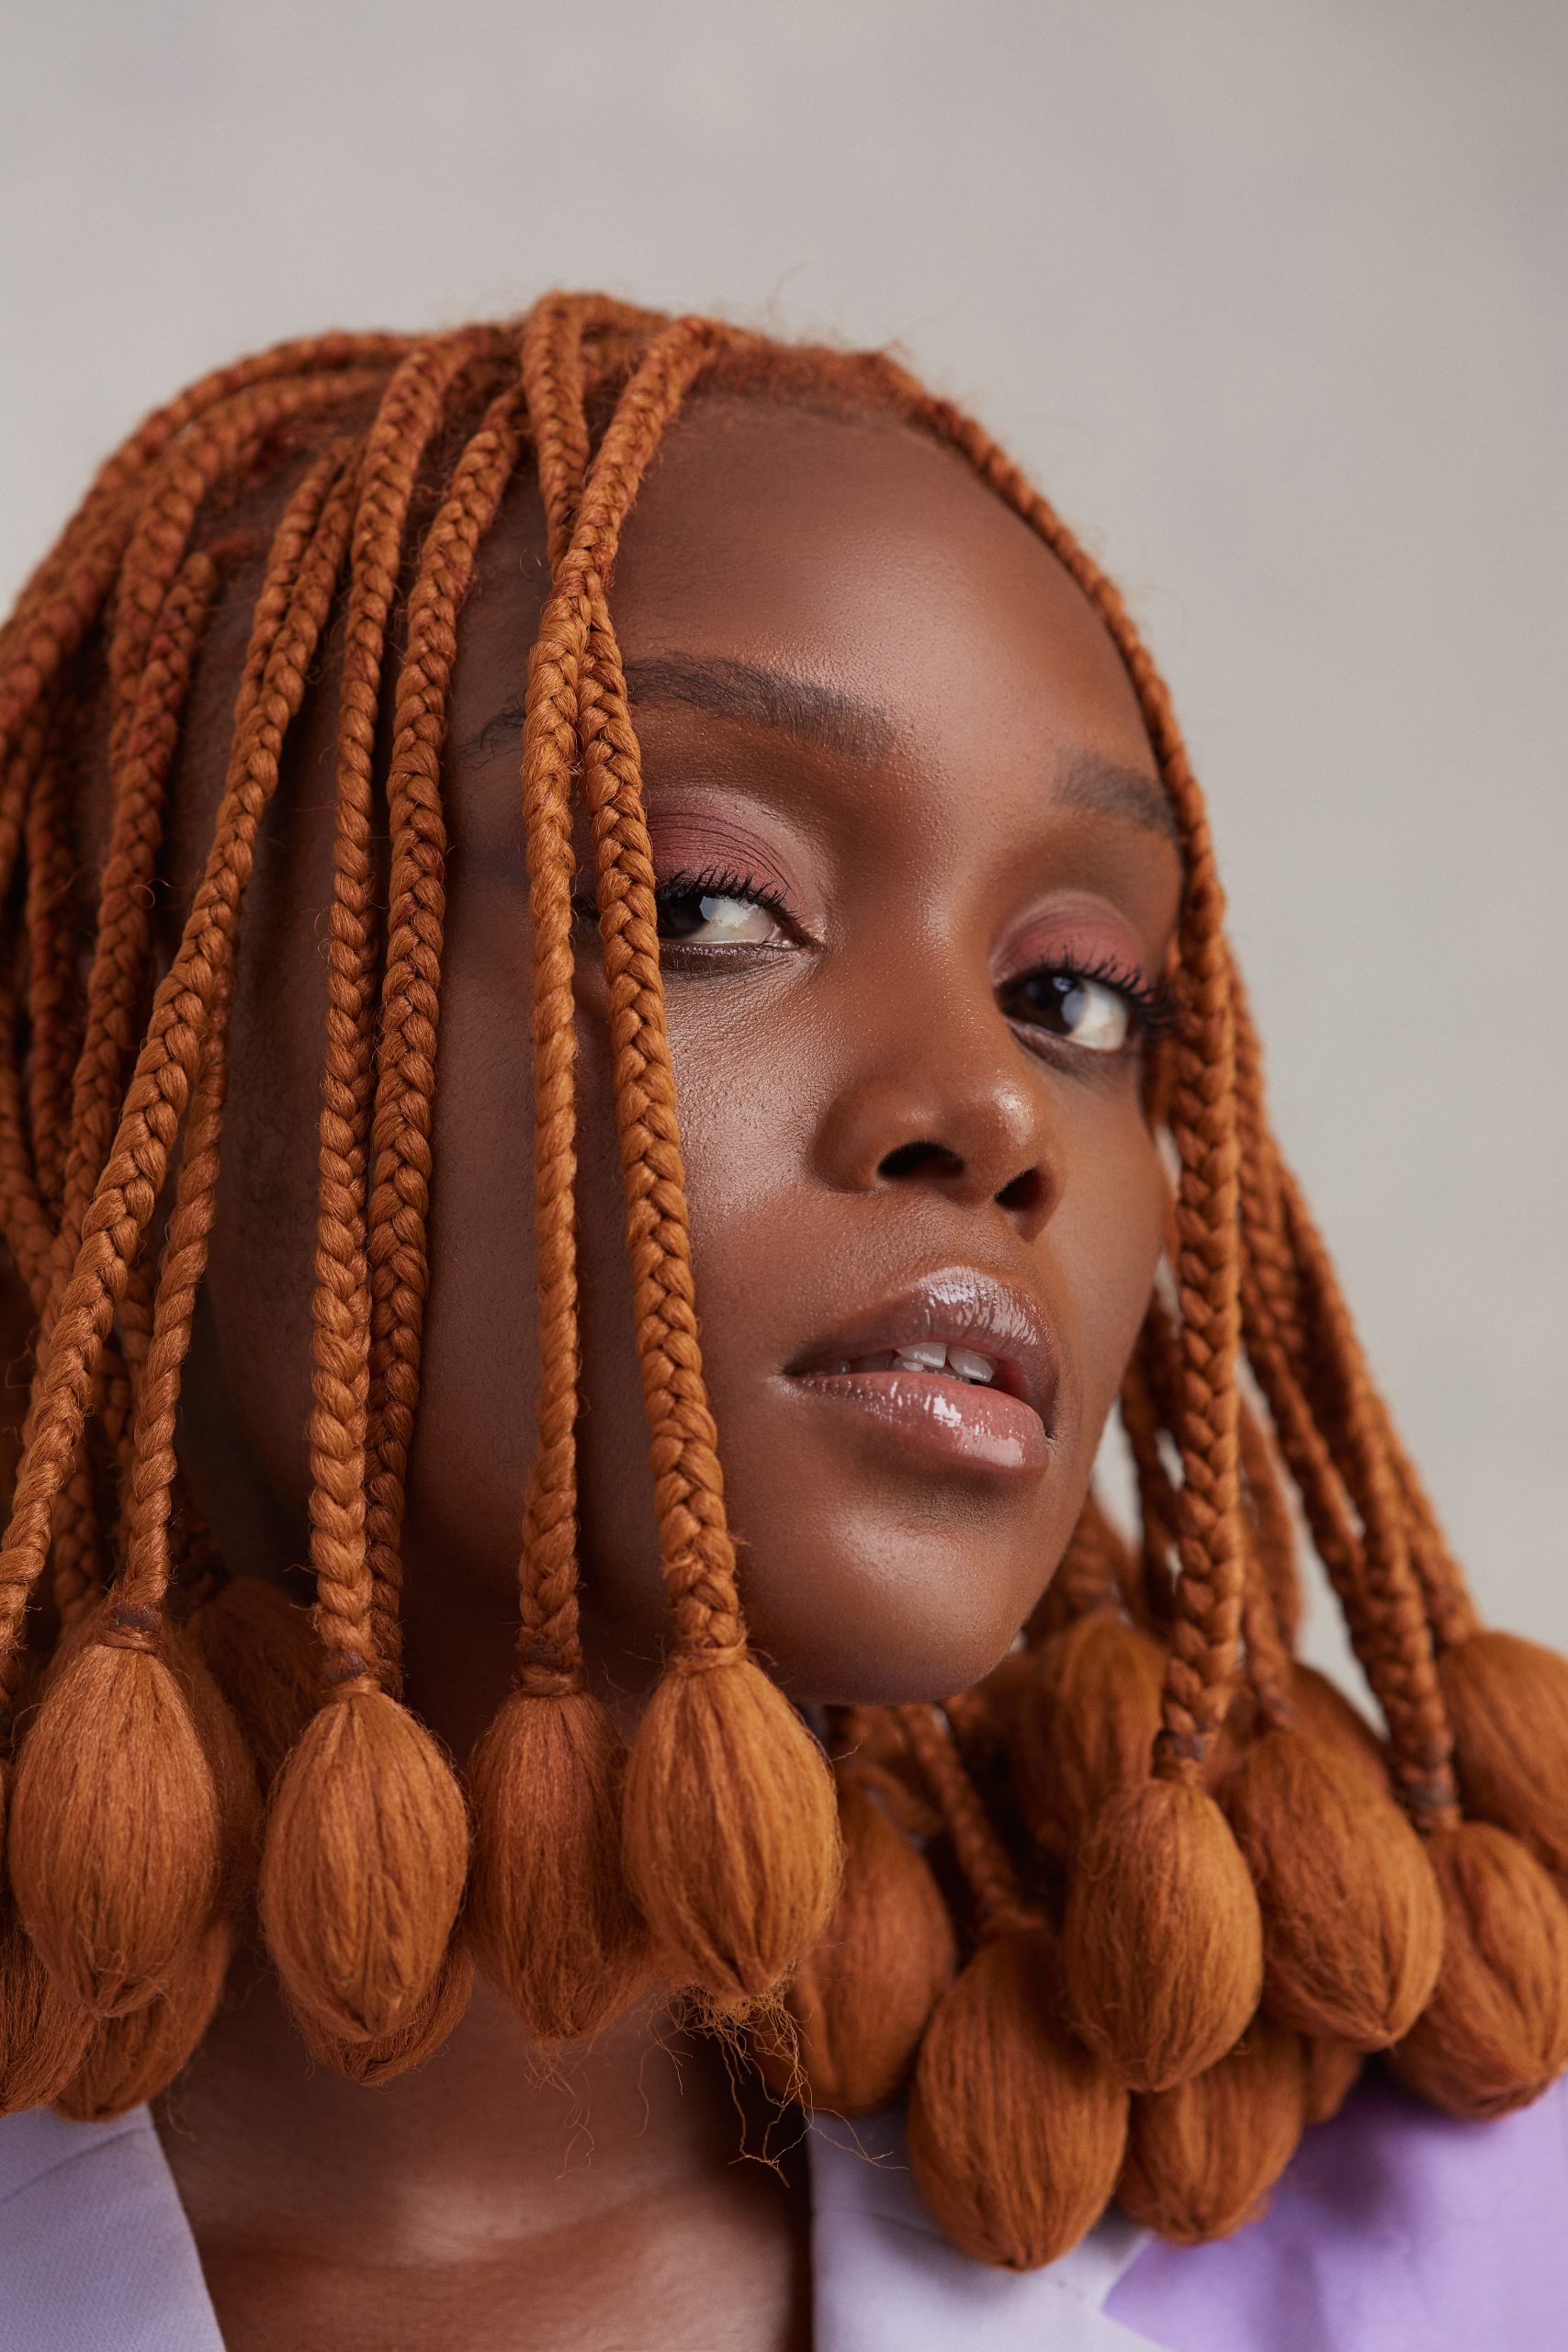 Falana is a singer whose style and grace seem effortless. The ease with which she approaches life is exhibited in her art of songwriting, act of live performances and through the bits of her everyday life she puts on display through social media. 